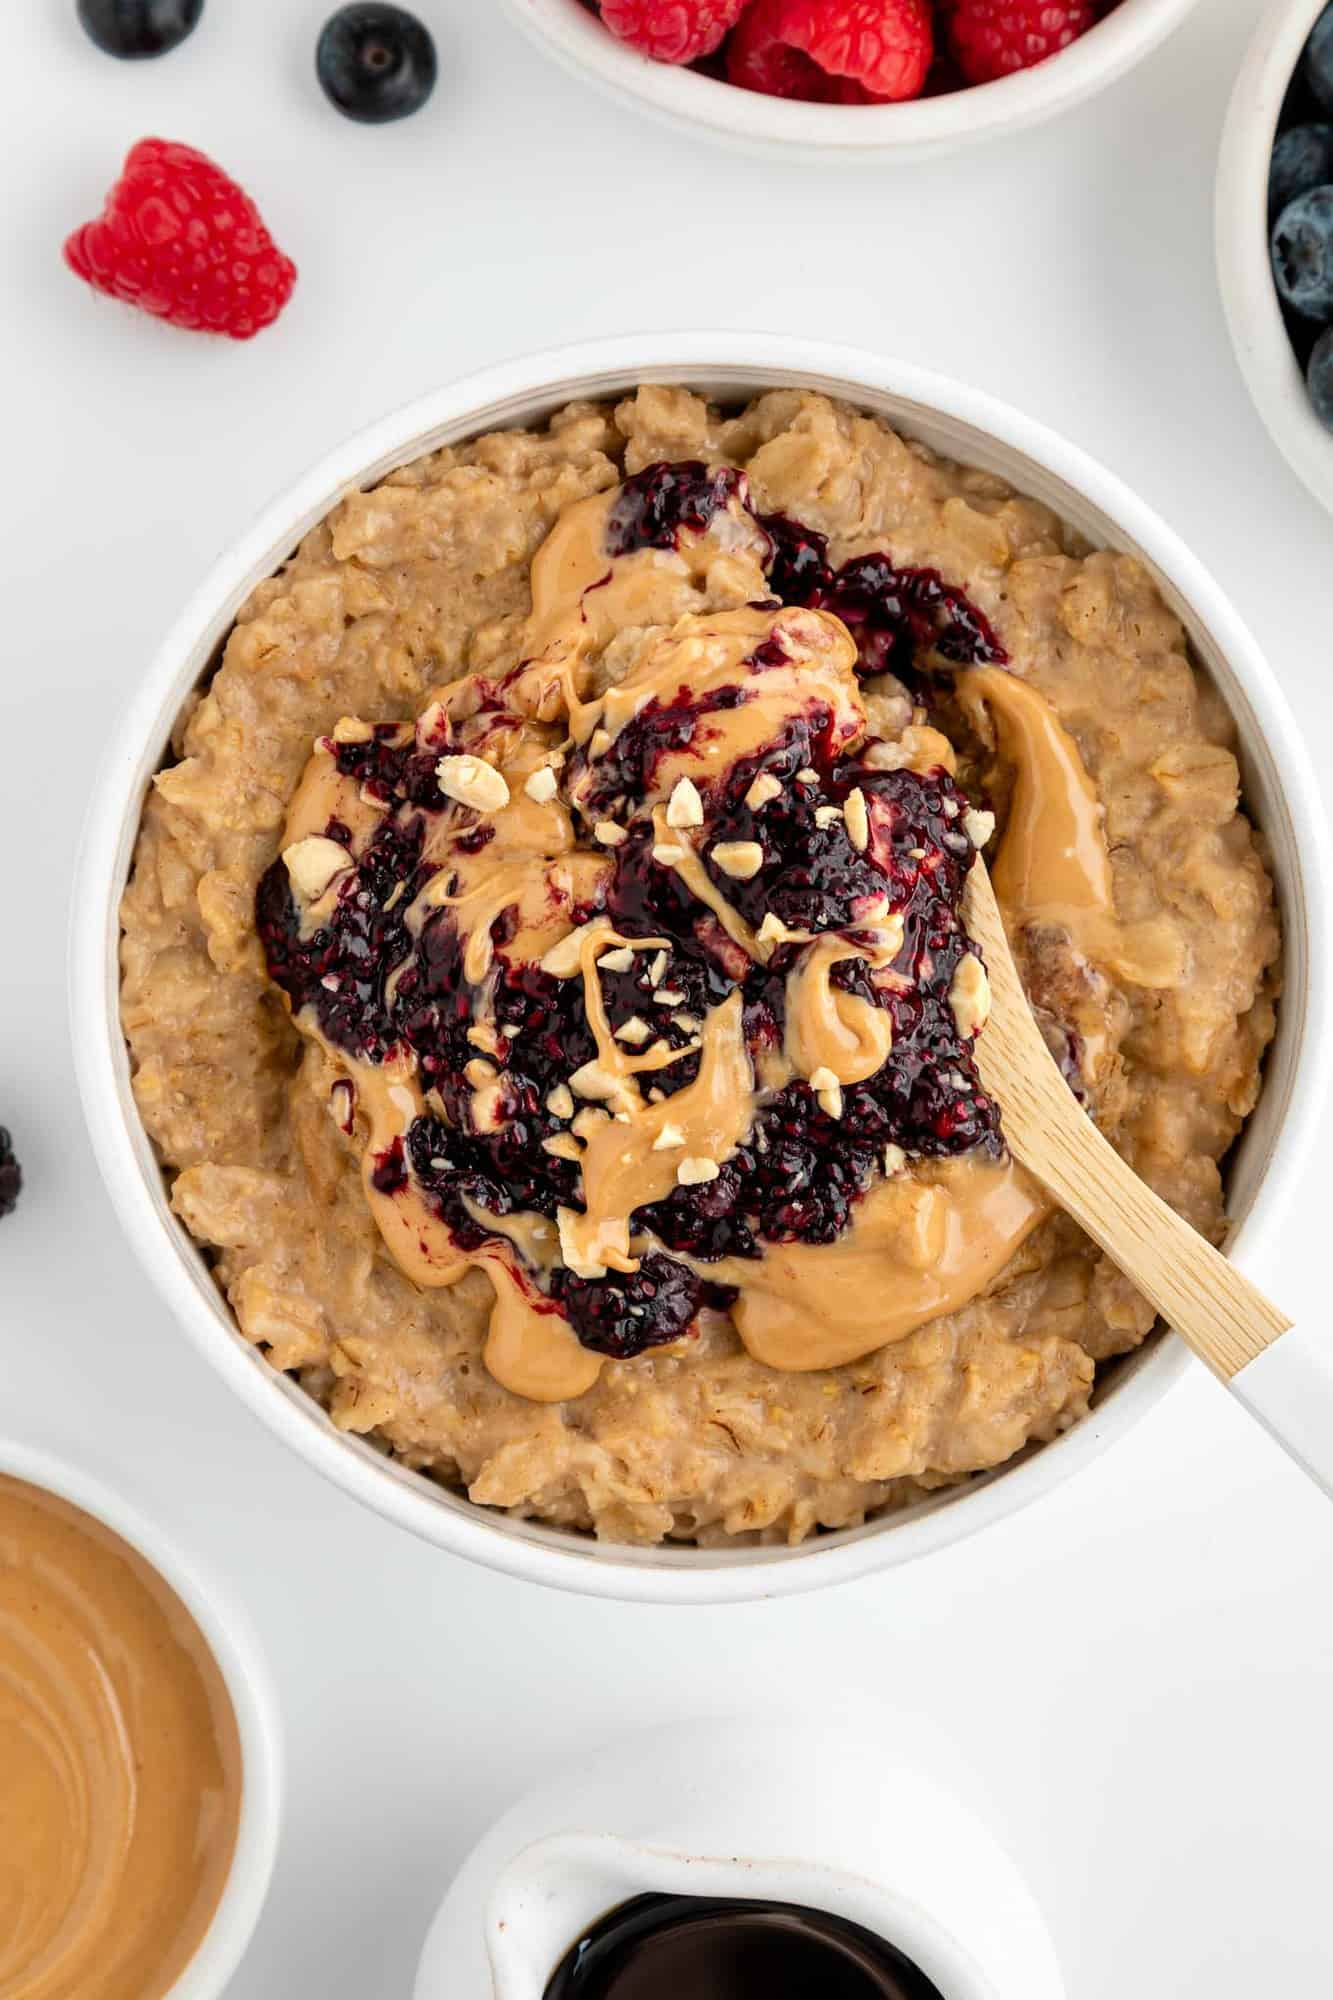 a spoon scooping into a bowl of peanut butter and jelly oatmeal